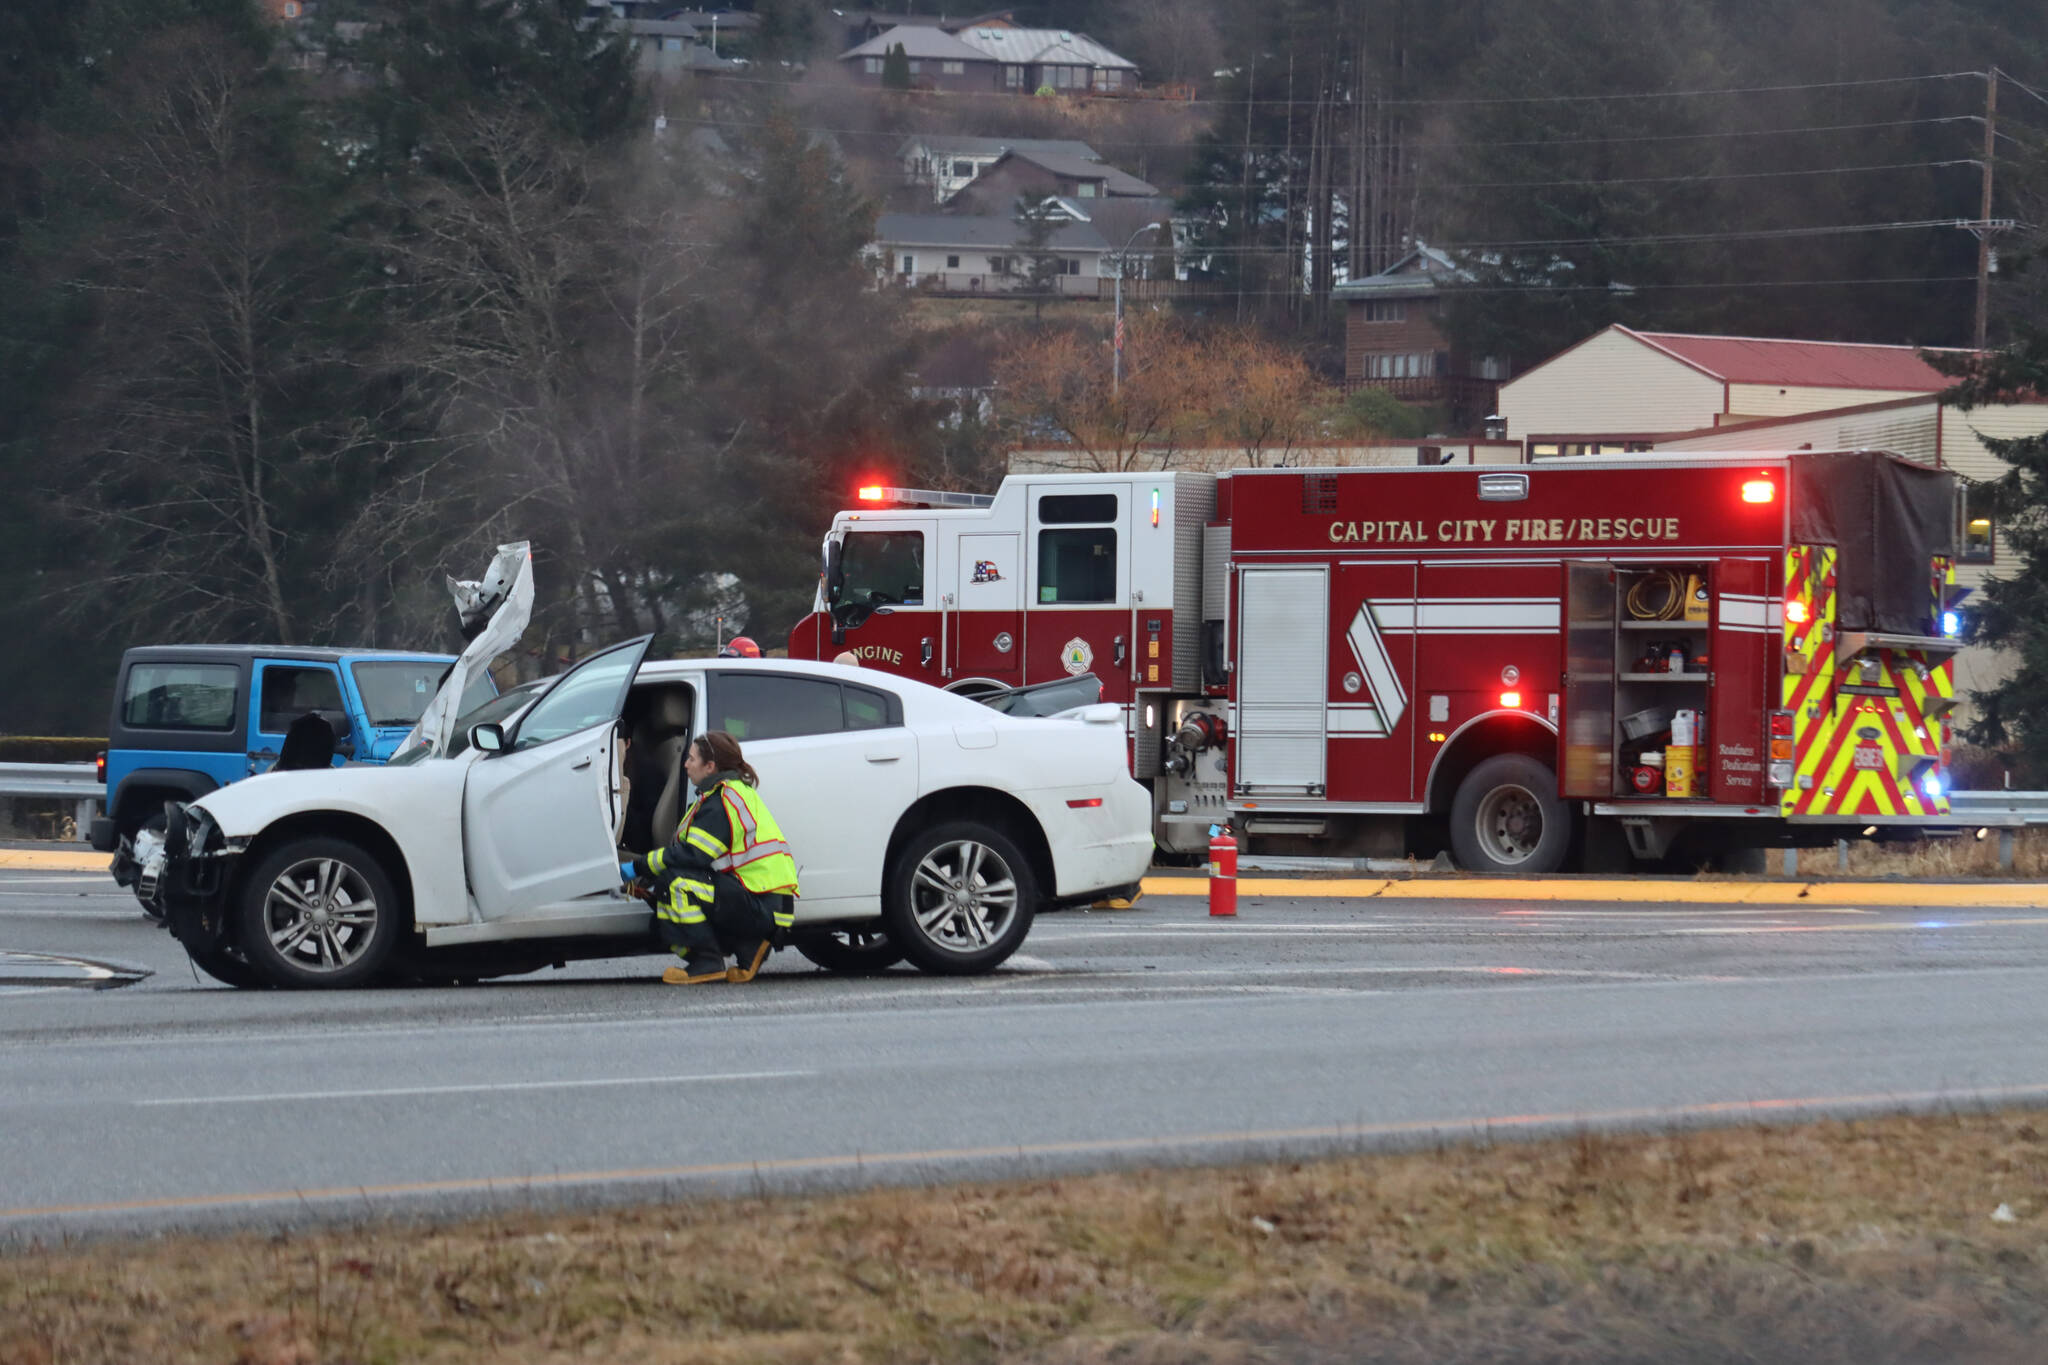 A 2014 white Dodge Challenger, seen here, was cited by JPD for failure to exercise due care which resulted in a three car crash on Thursday afternoon at the intersection of Vanderbilt and Egan Drive. (Jonson Kuhn / Juneau Empire)